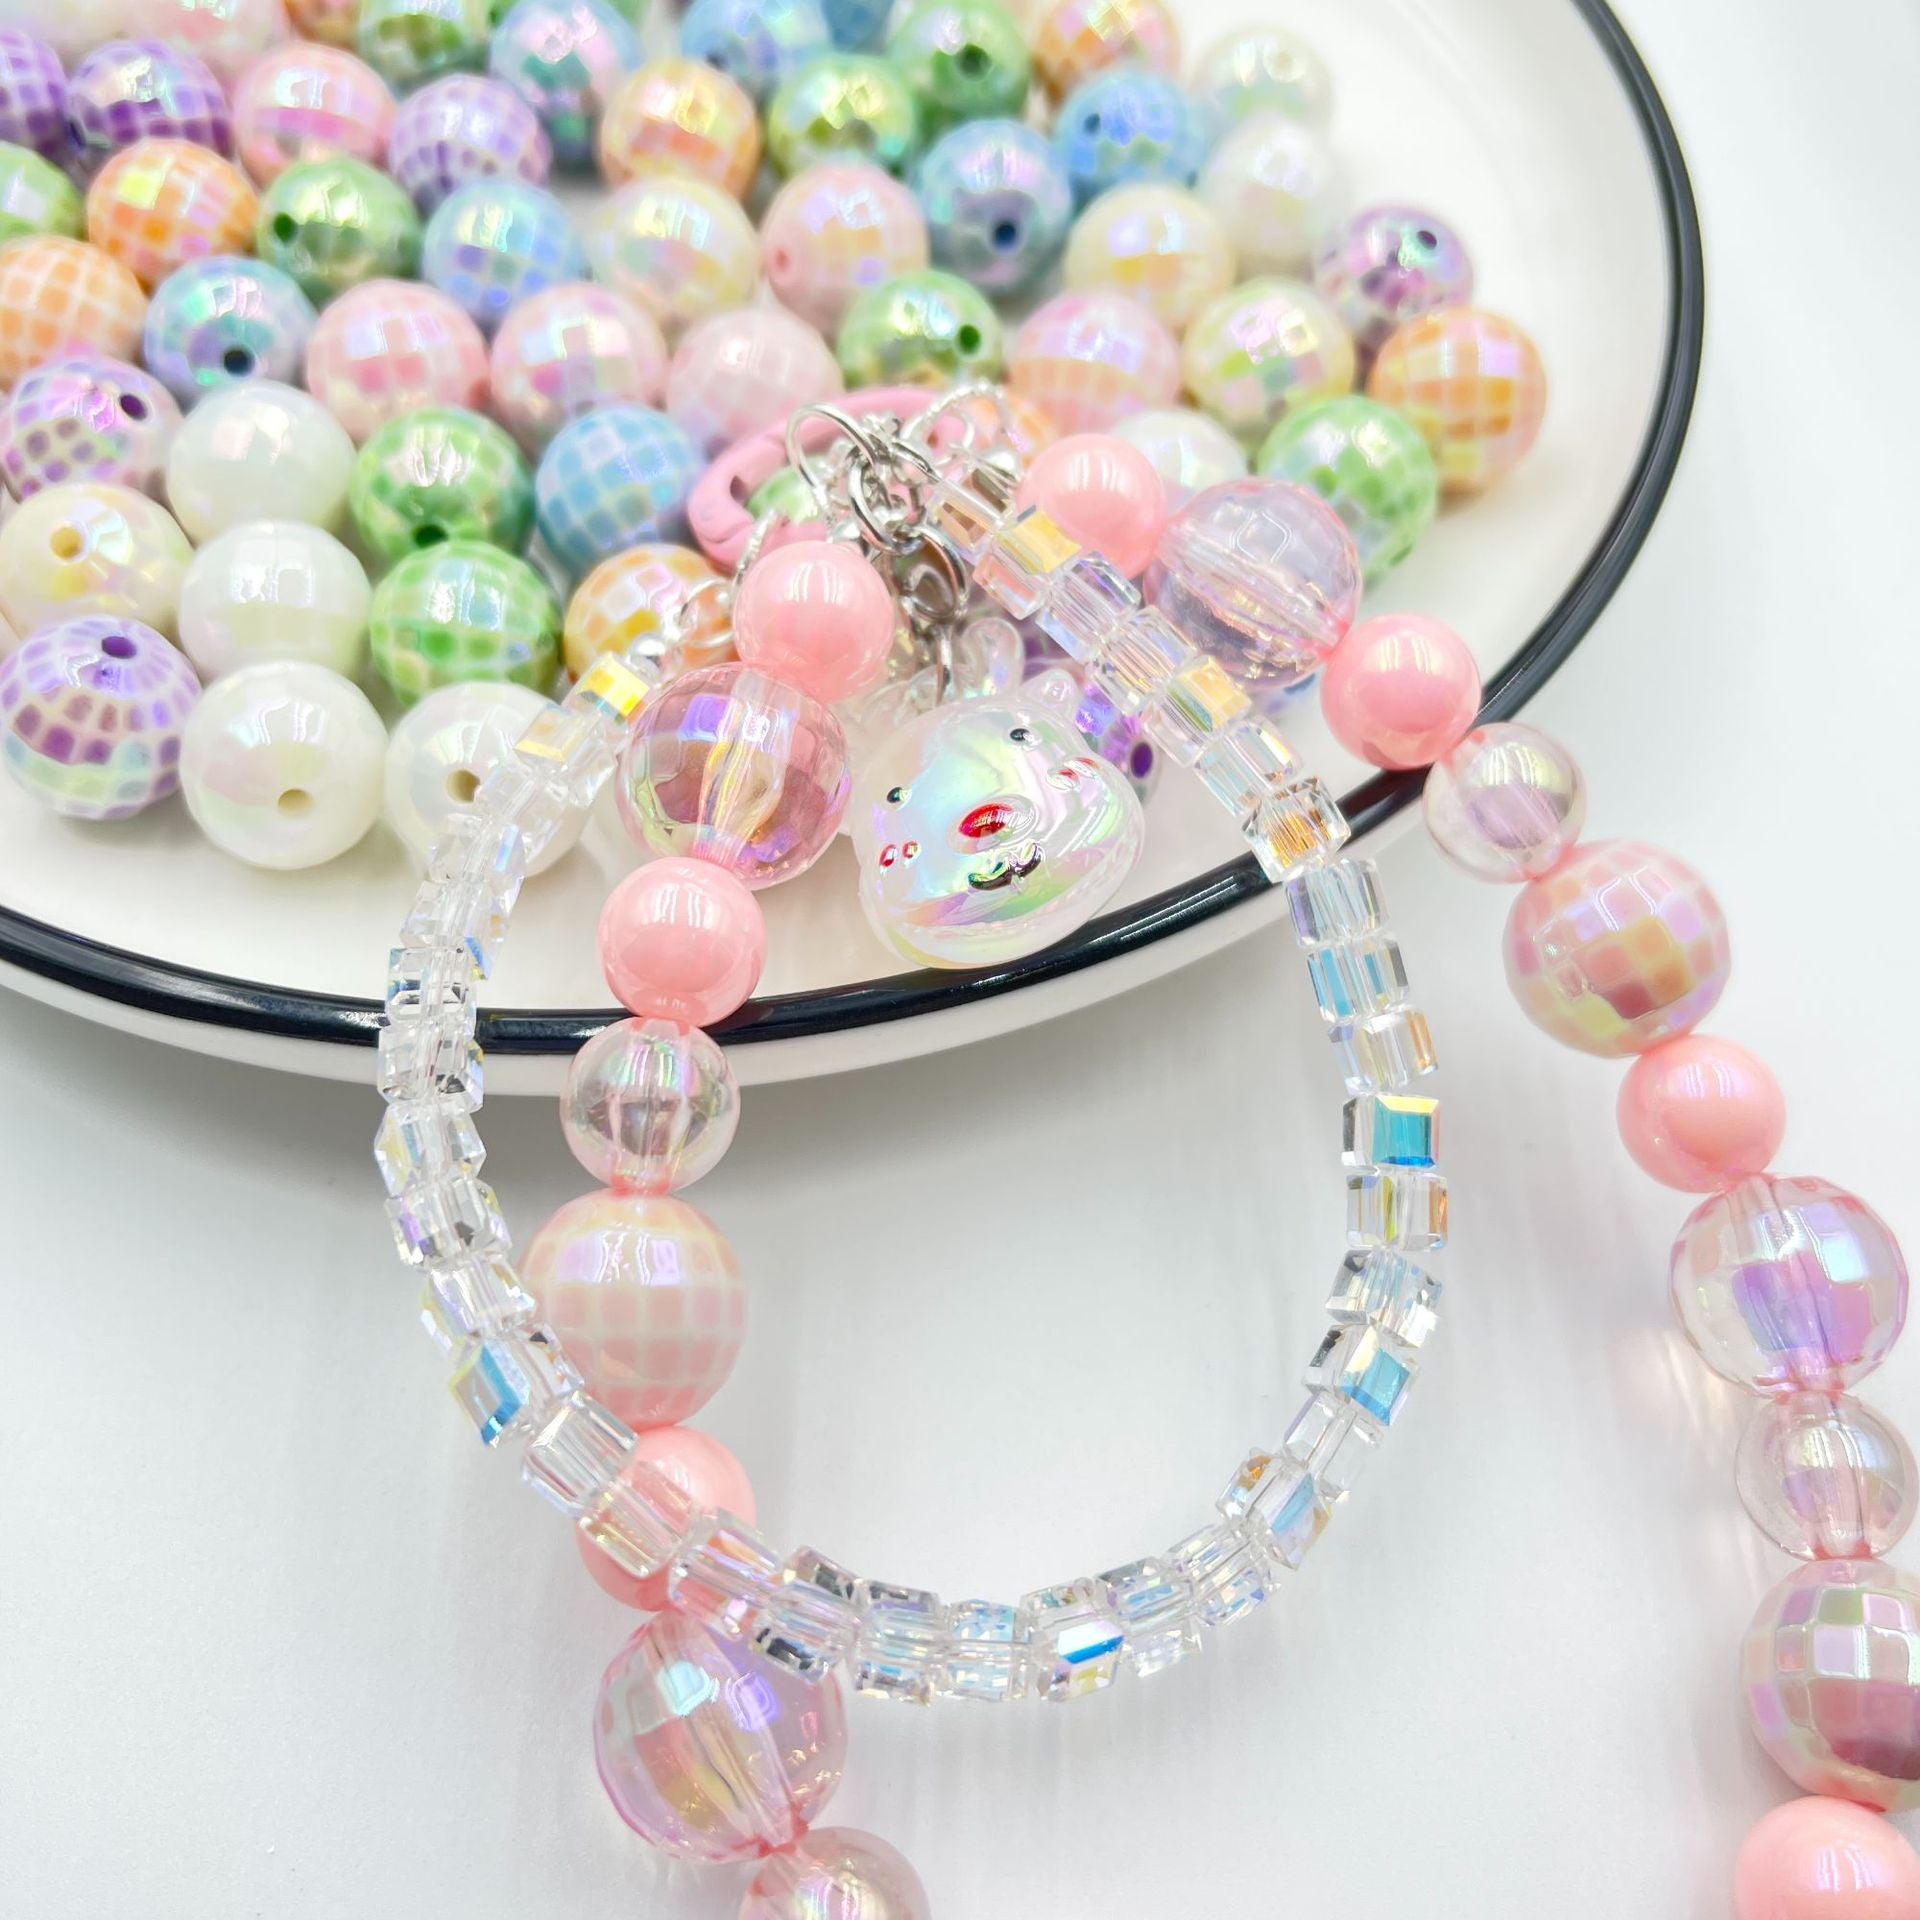 Wholesale of 10pcs 16mm UV Plated Acrylic Plaid Beads DIY Beaded Pen Accessories ACC-BDS-JFei001